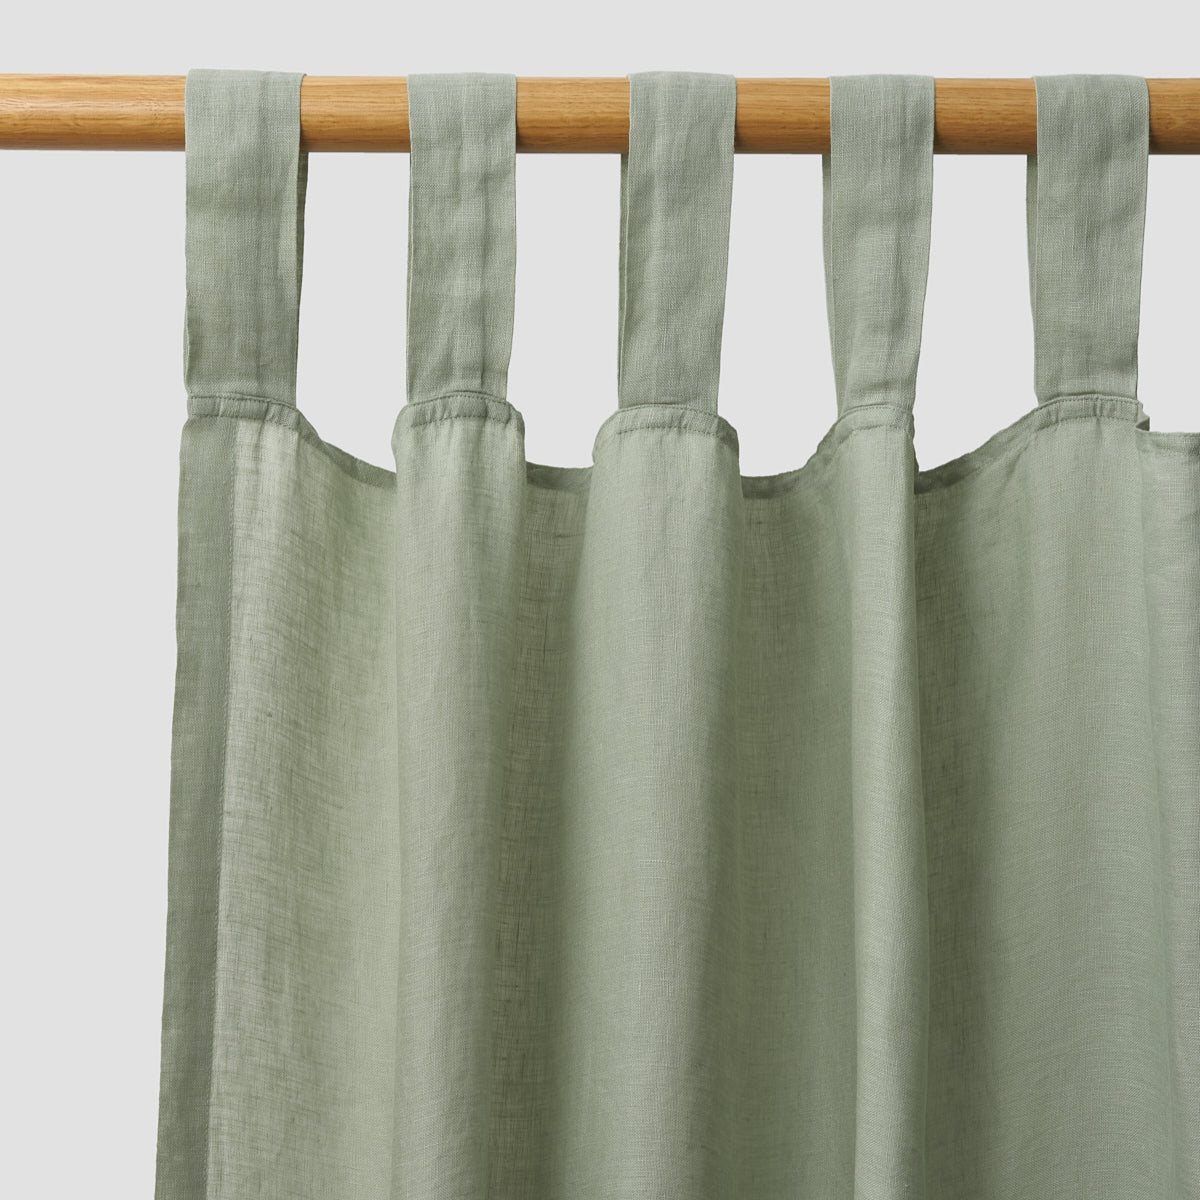 Sage Green Linen Curtains - Piglet in Bed